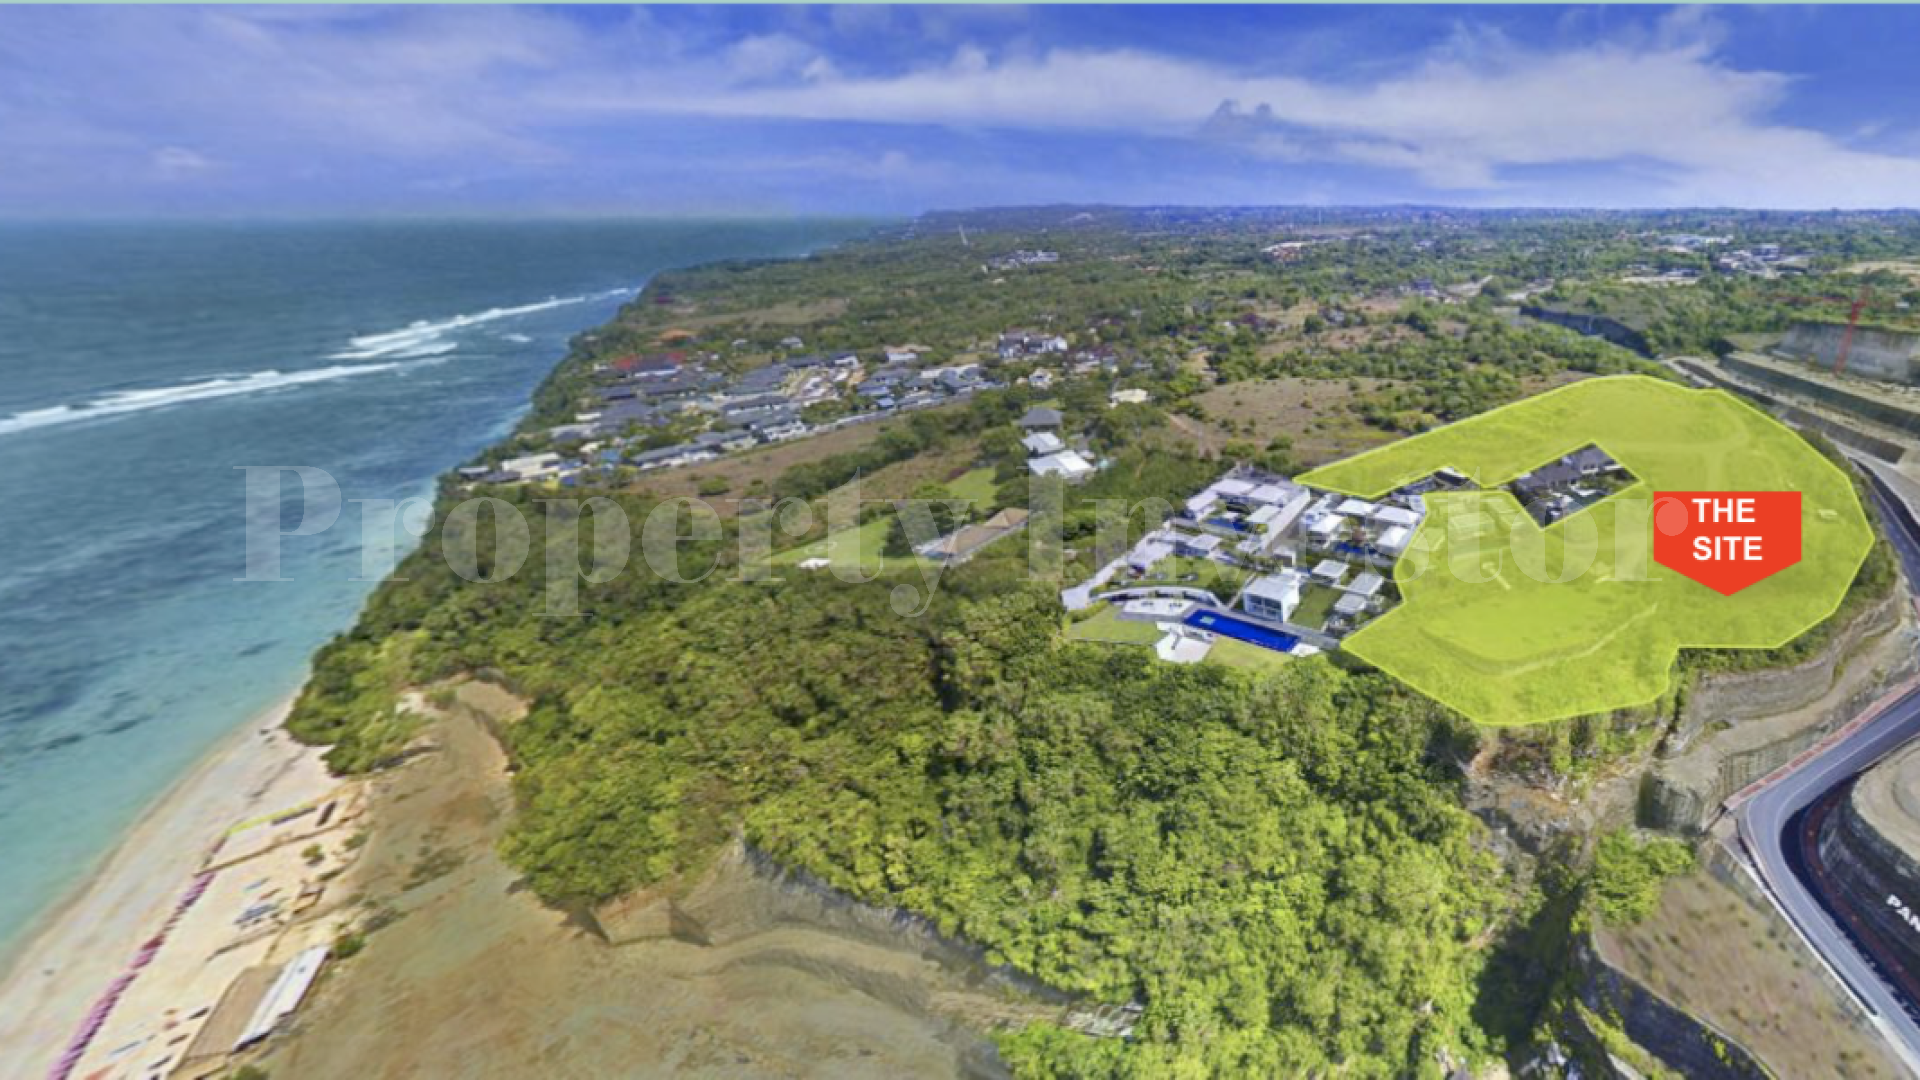 2.65 Hectare Clifftop Lot for Development in Pandawa Beach, South Bali